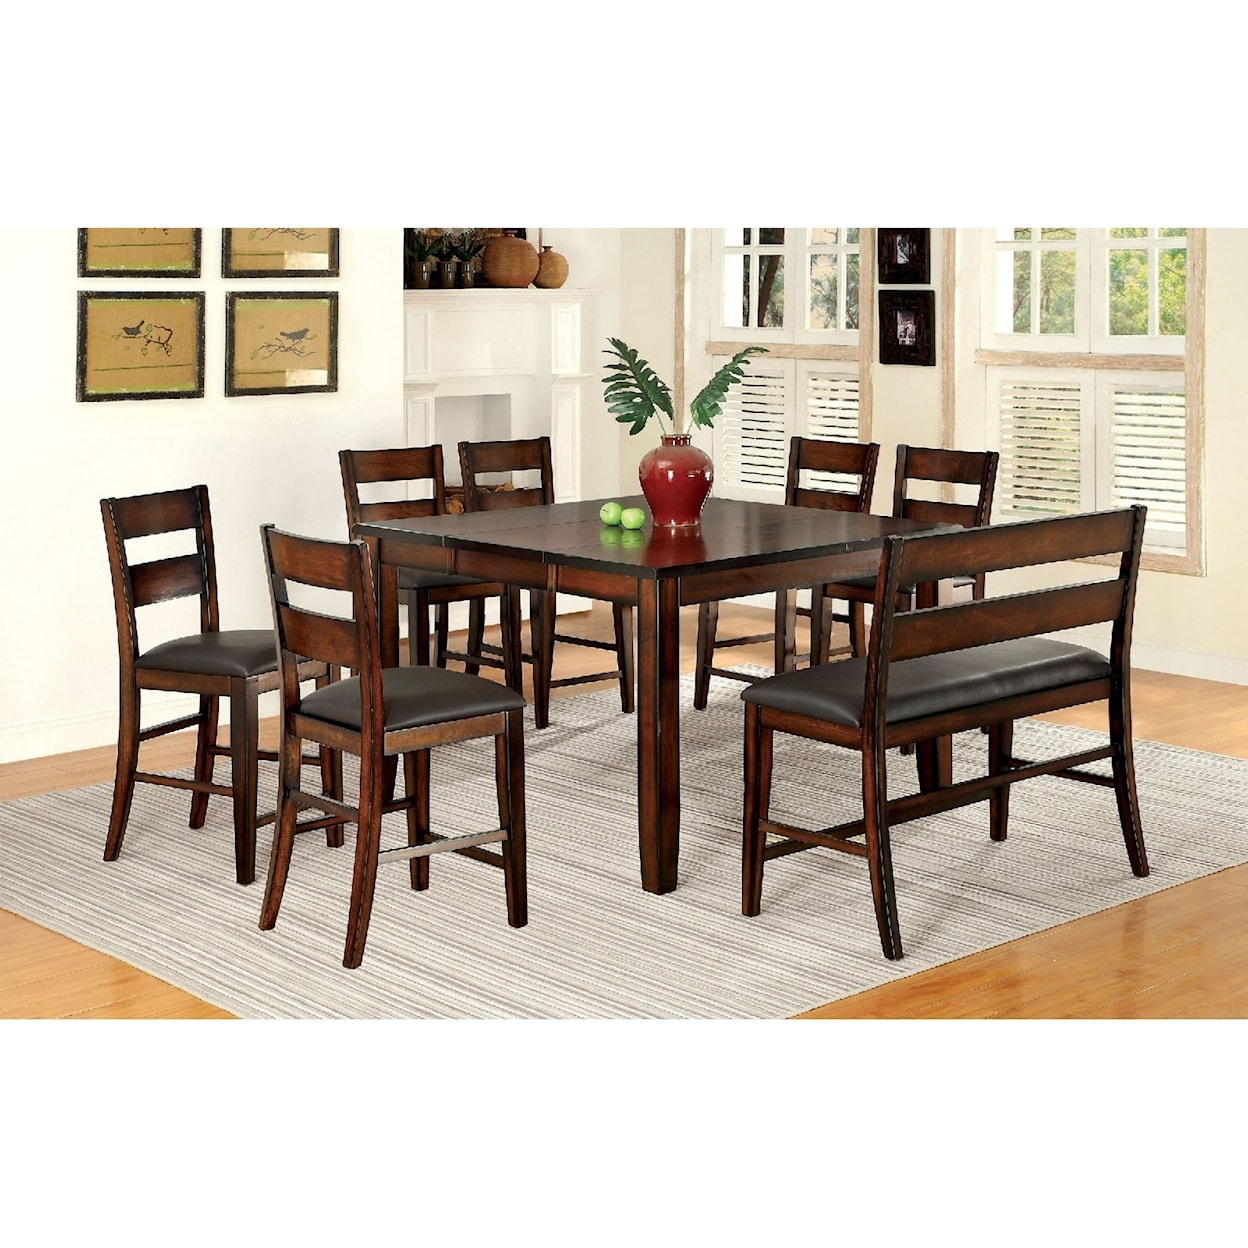 Furniture of America Dickinson Counter Height Dining Set